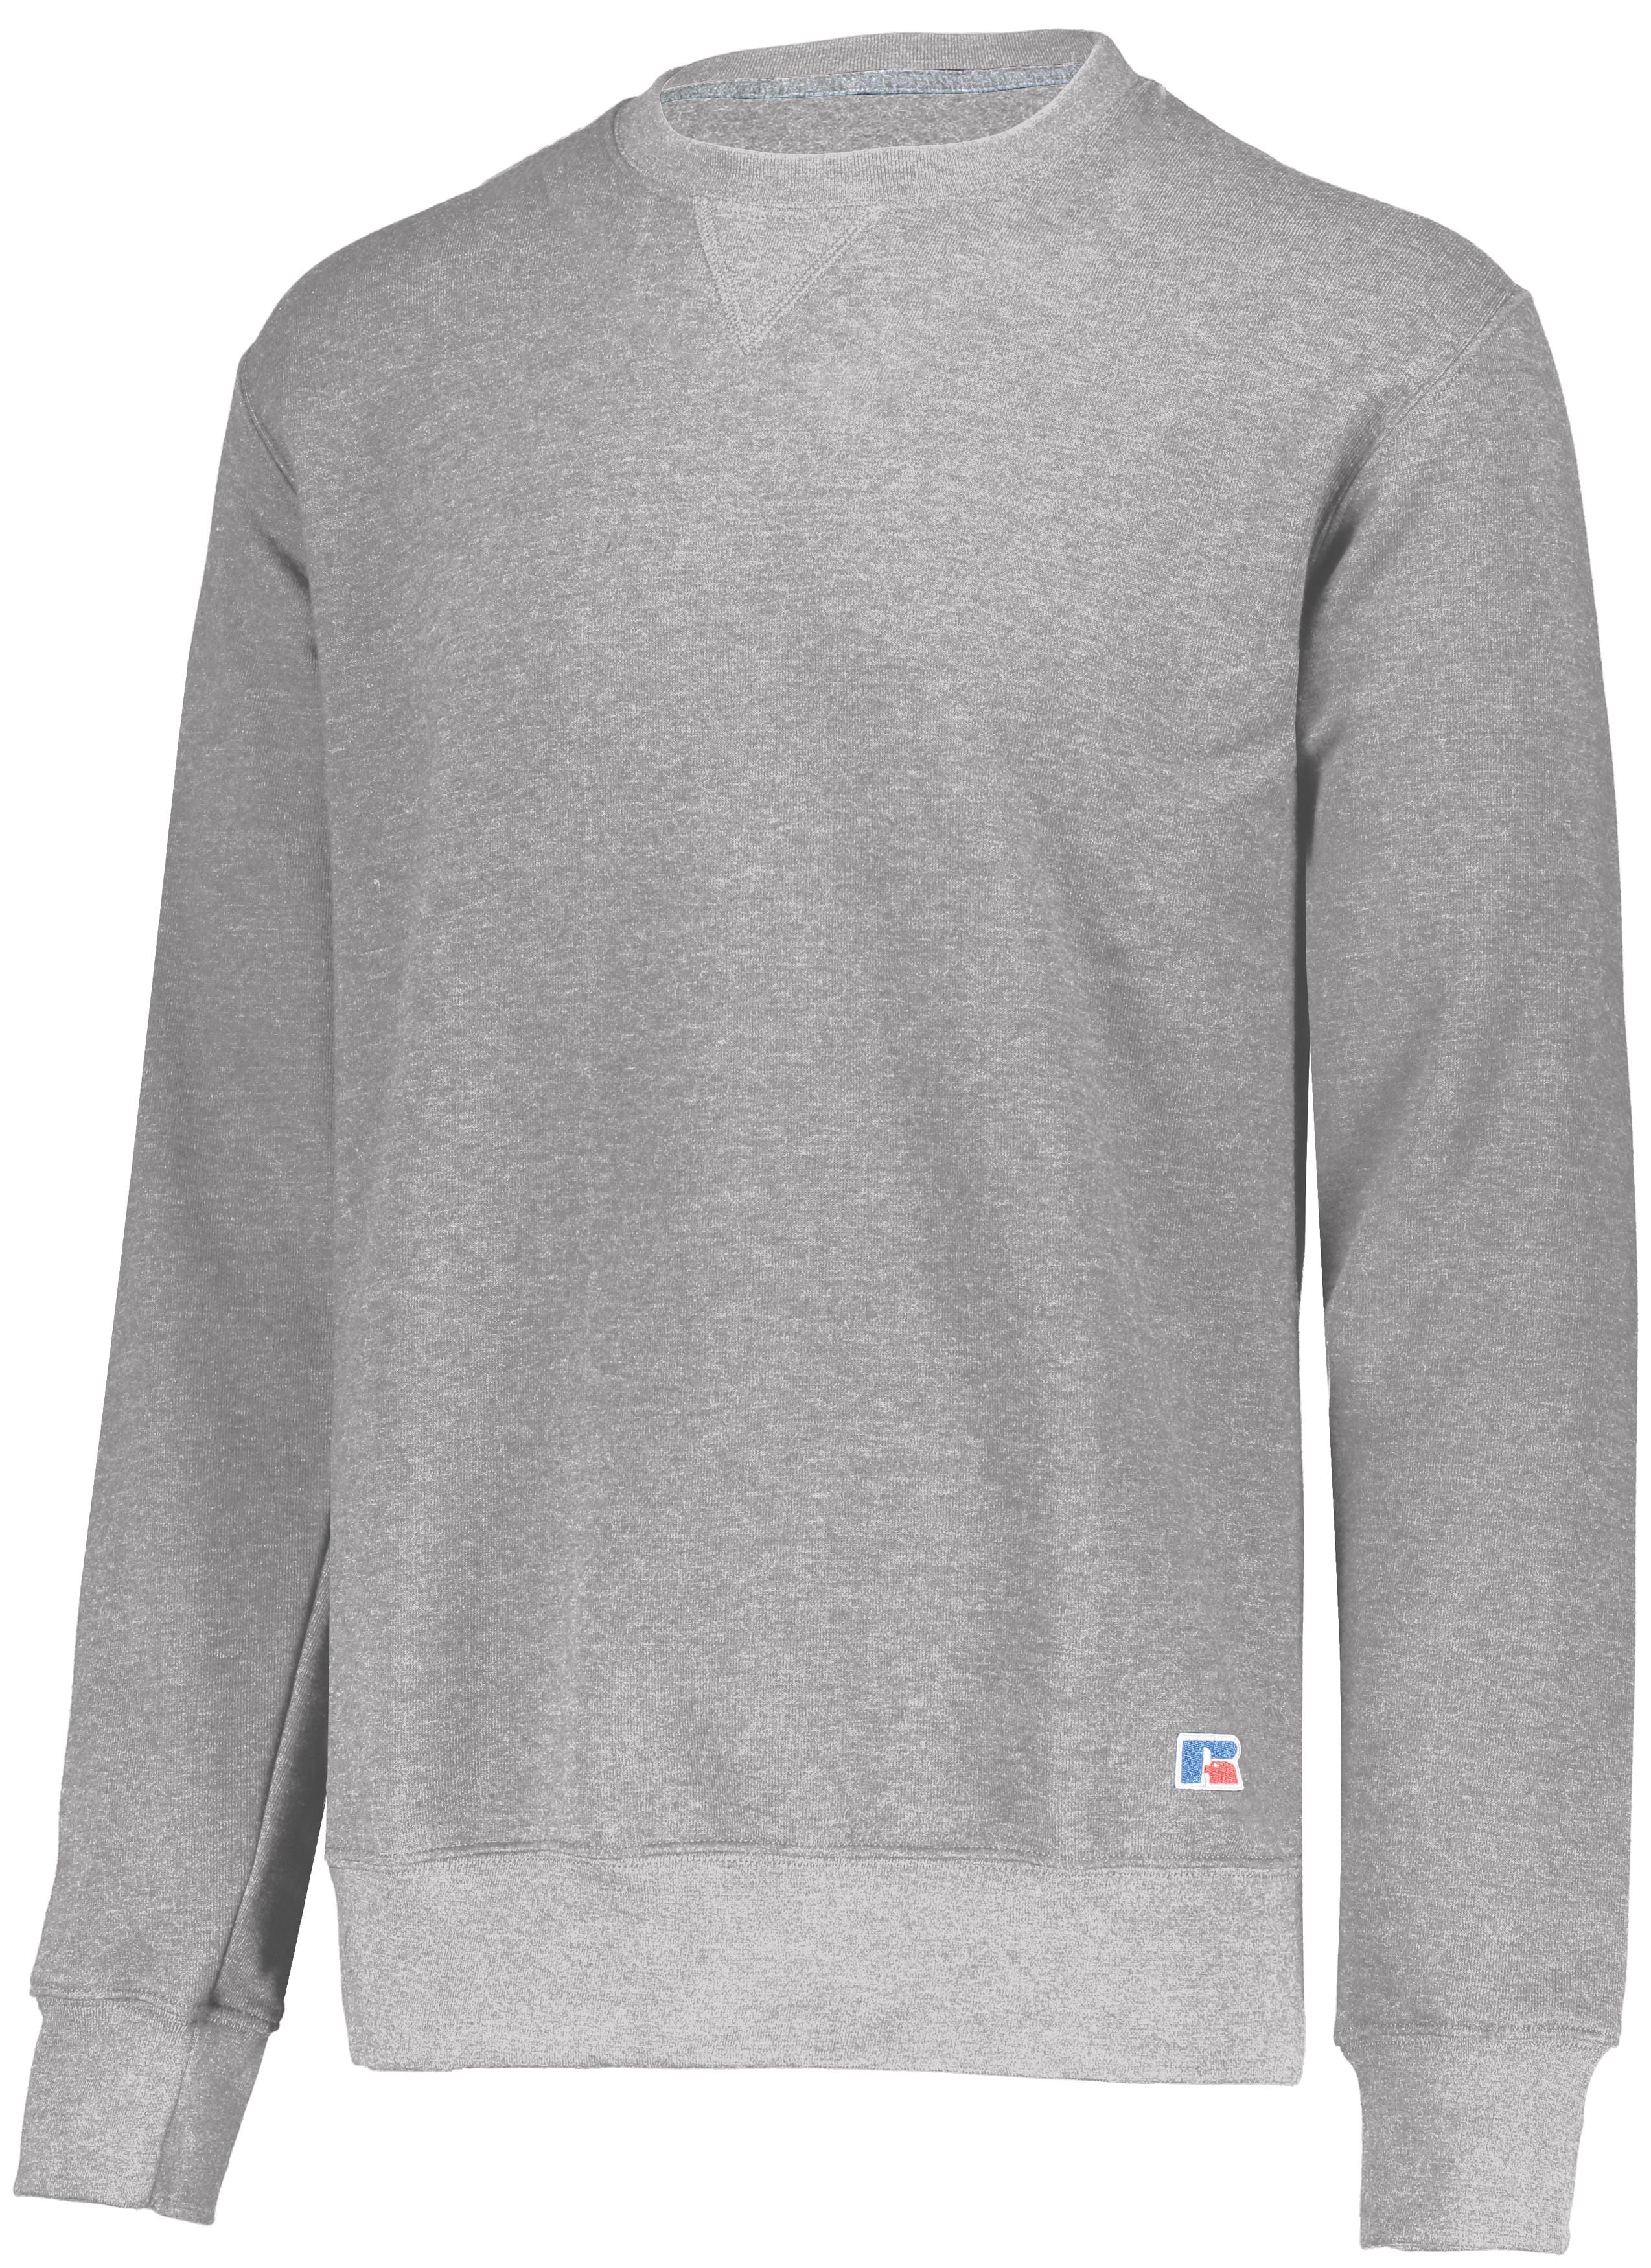 Russell Athletic 80/20 Fleece Crew in Medium Grey Heather  -Part of the Adult, Russell-Athletic-Products product lines at KanaleyCreations.com